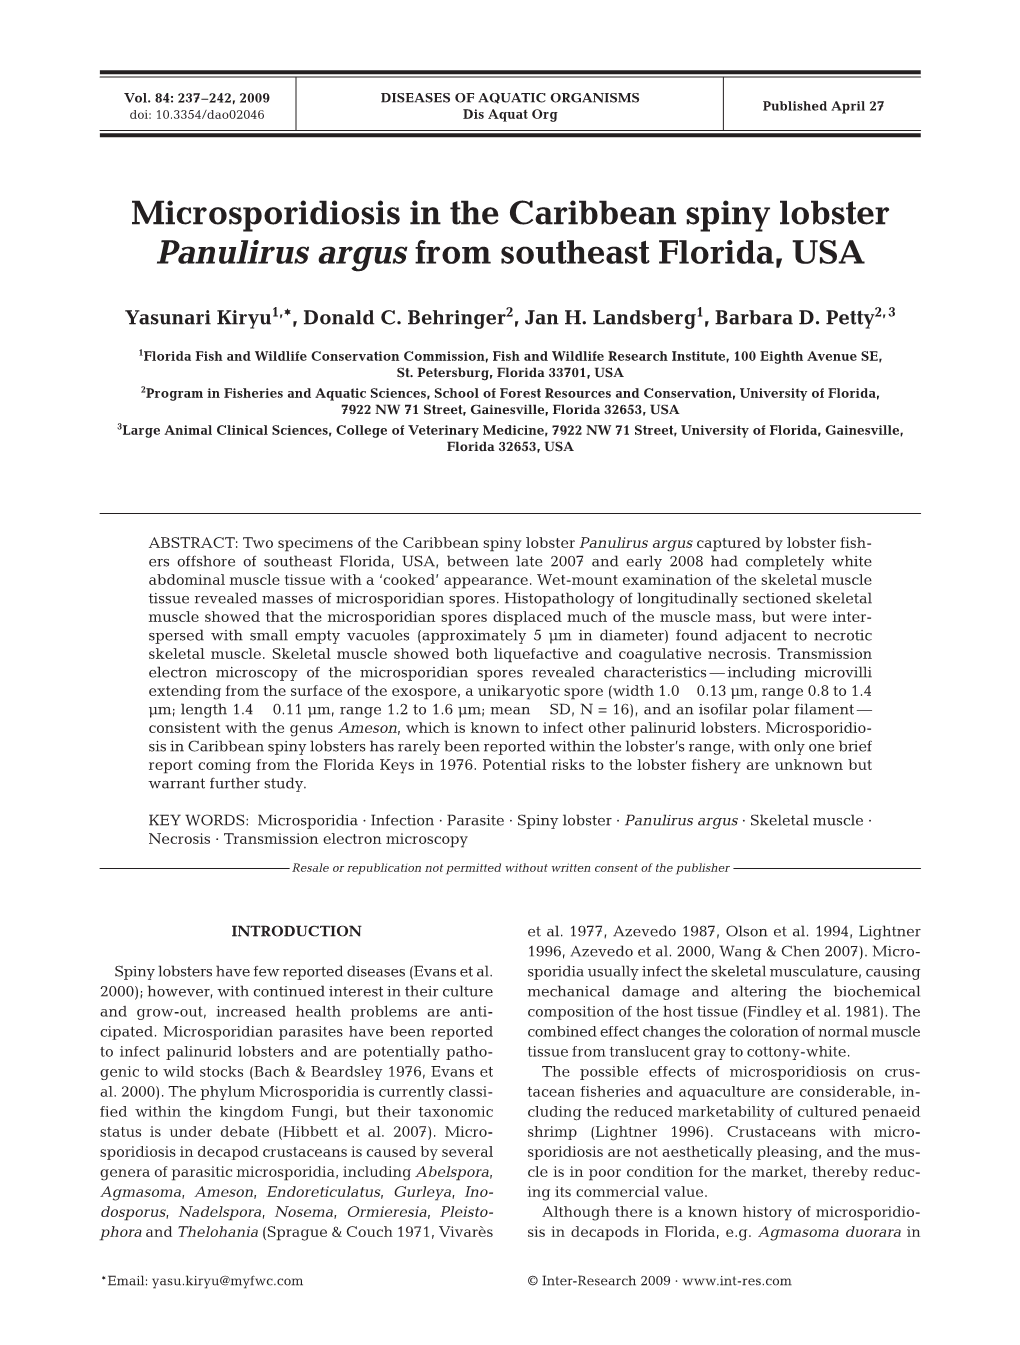 Microsporidiosis in the Caribbean Spiny Lobster Panulirus Argus from Southeast Florida, USA